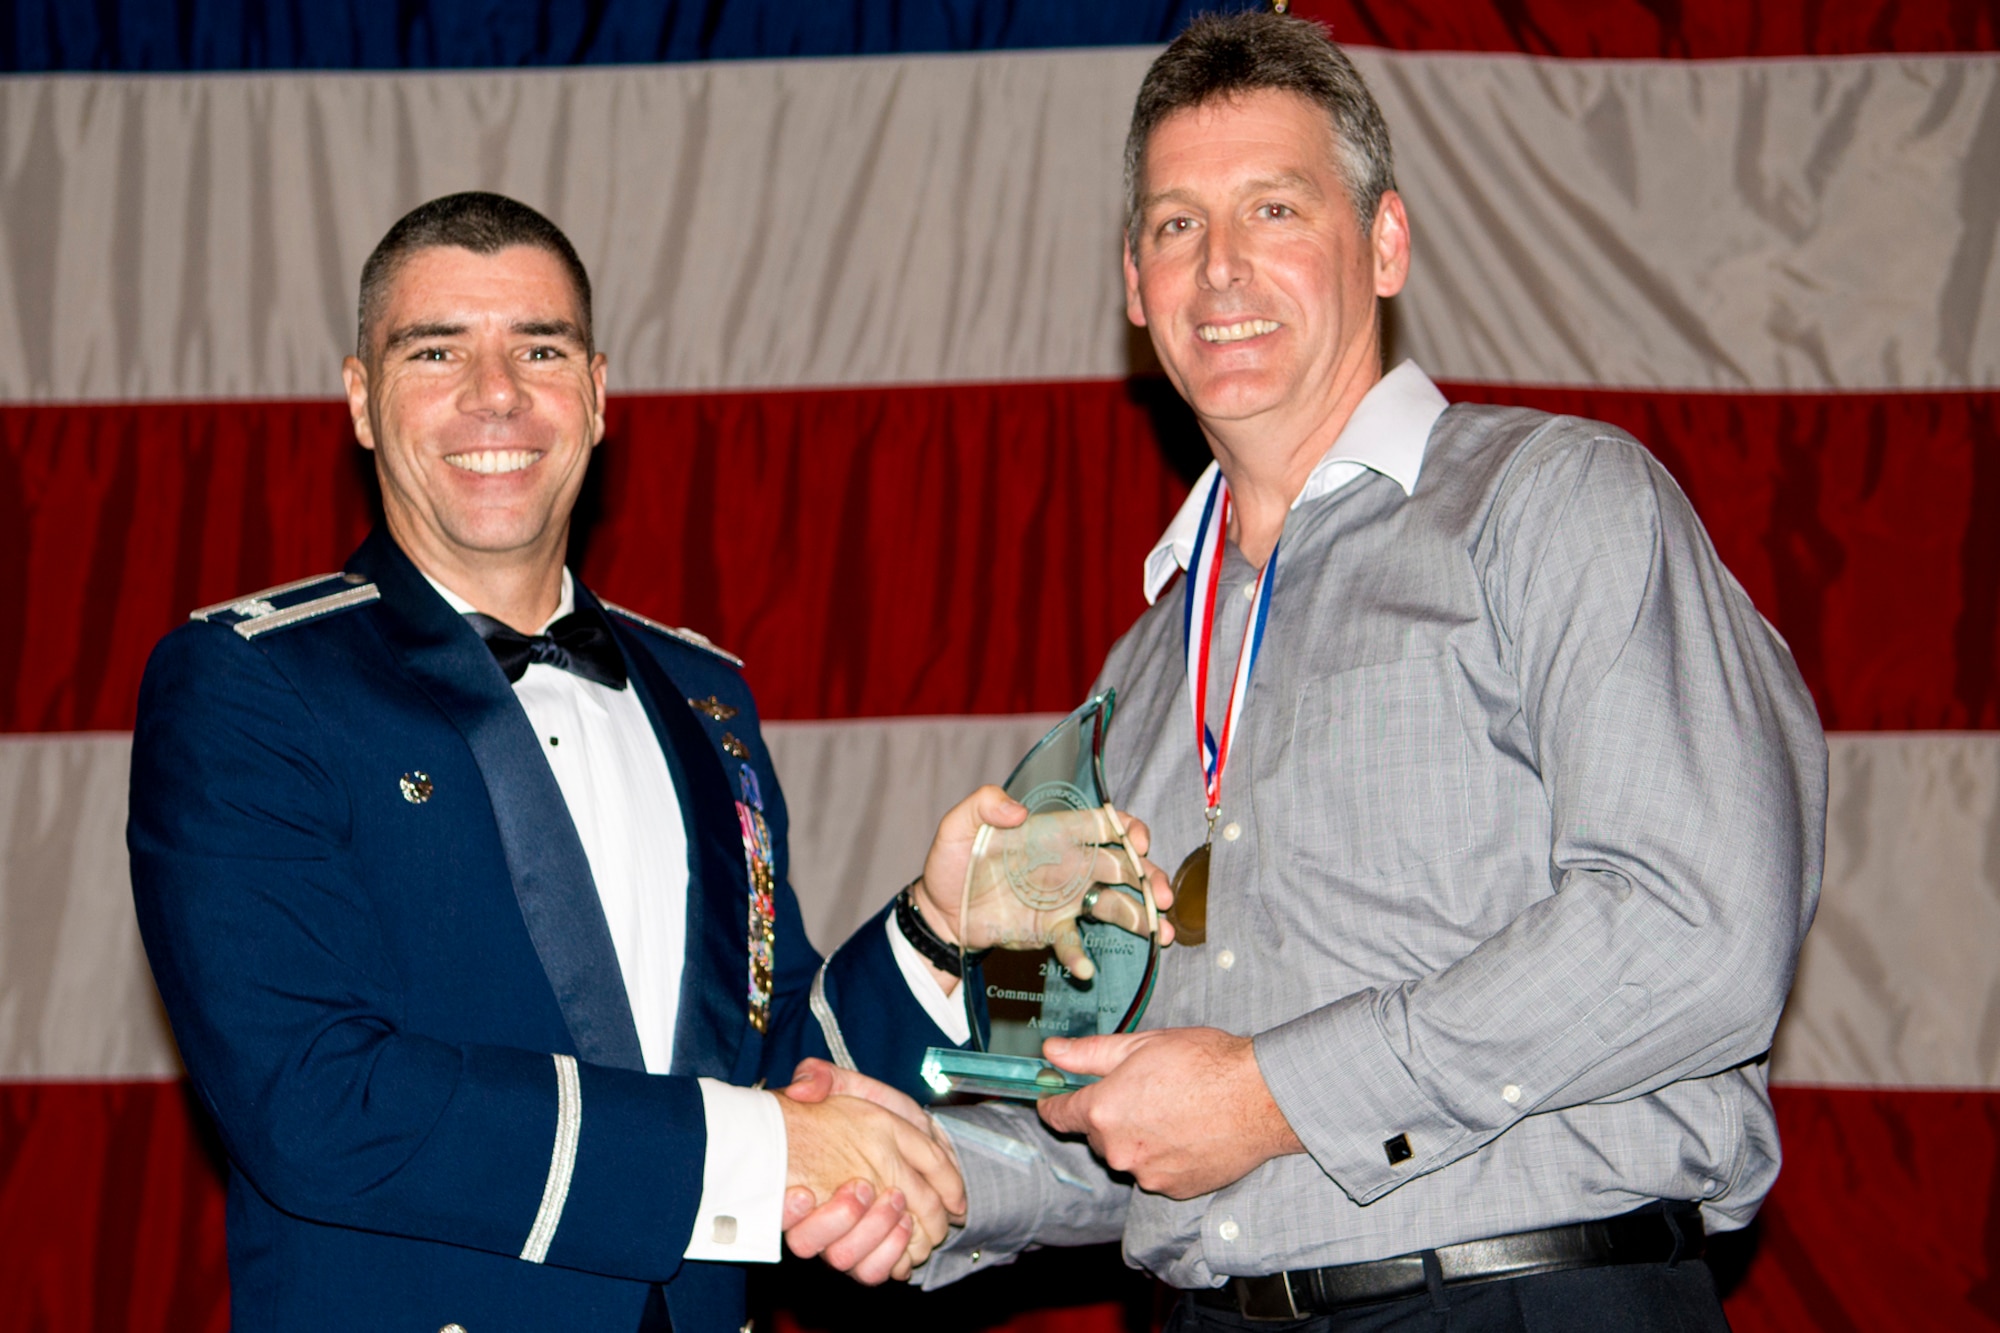 U.S. Air Force Lt. Col. Kenneth Rose, 307th Maintenance Group commander, presents the Community Service Award to David Griffore during Gatorfest, Dec. 1, 2012, Barksdale Air Force Base, La. The purpose of Gatorfest is to enhance morale and esprit de corps, as well as recognize outstanding Airmen assigned to the 307th Bomb Wing. (U.S. Air Force photo by Master Sgt. Greg Steele/Released)